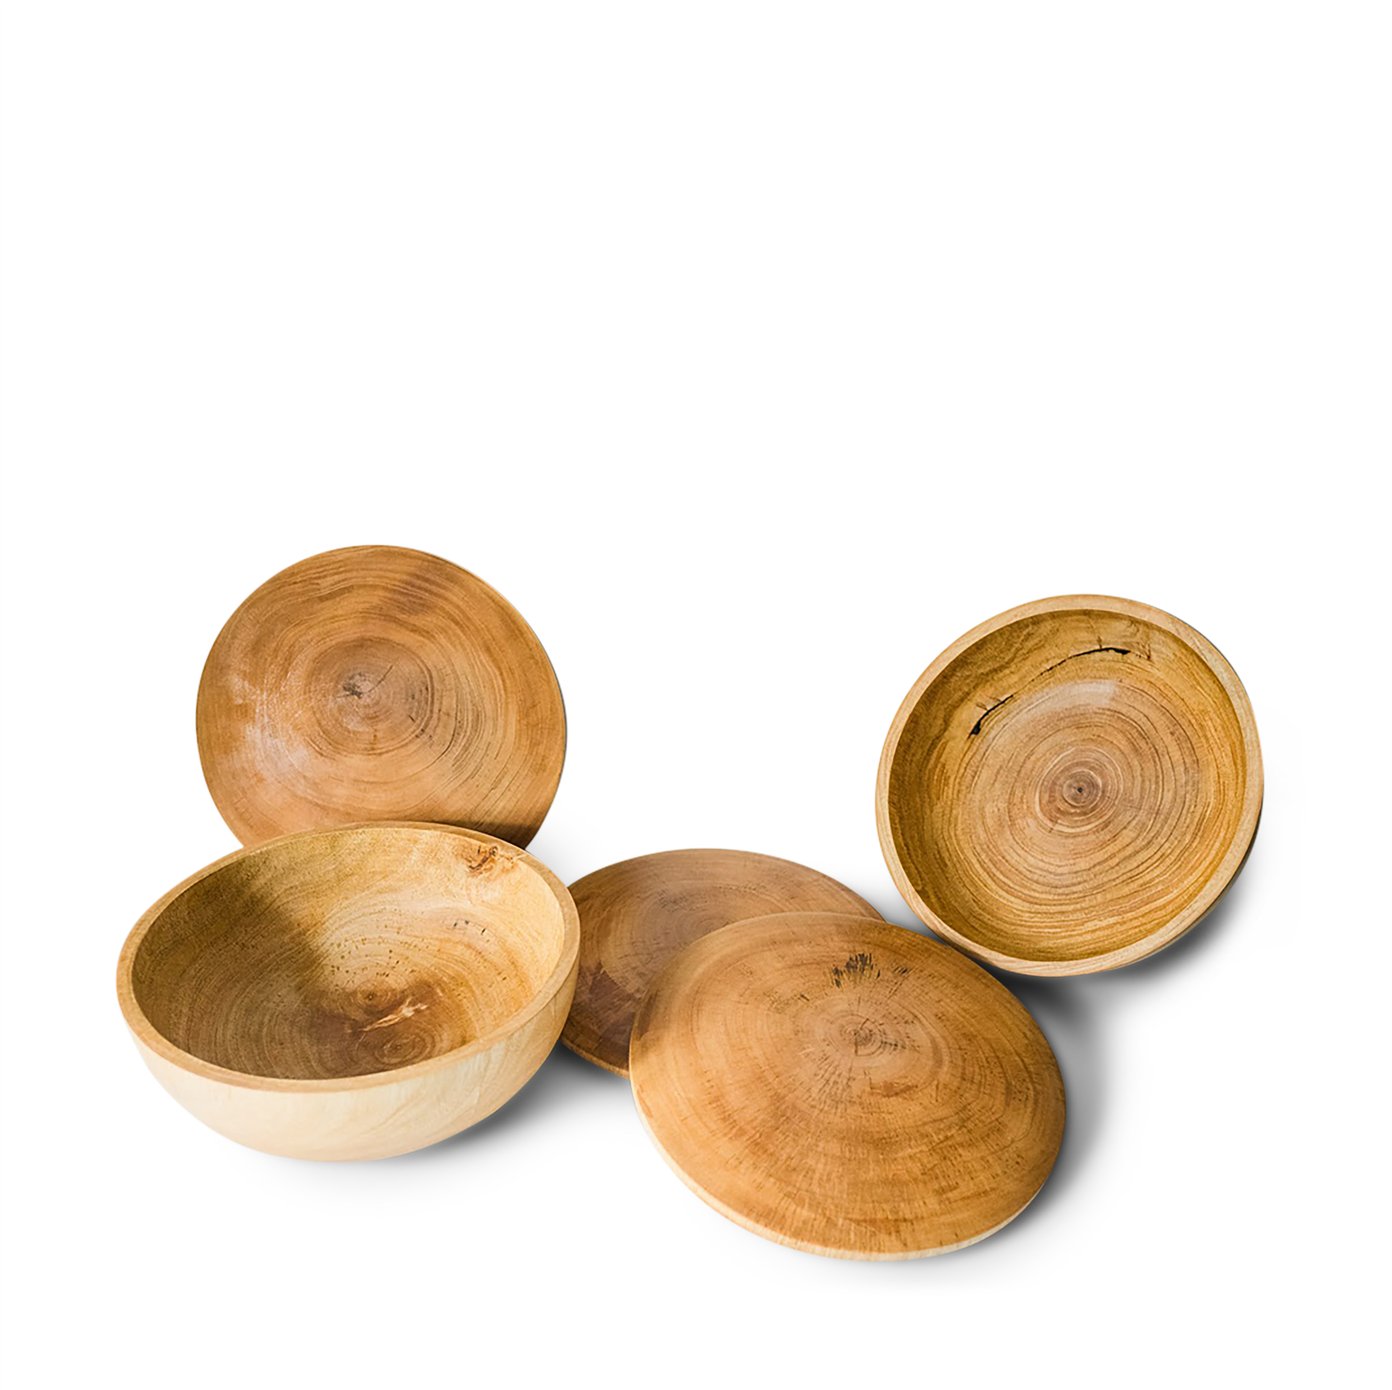 The Everything Lidded Bowl